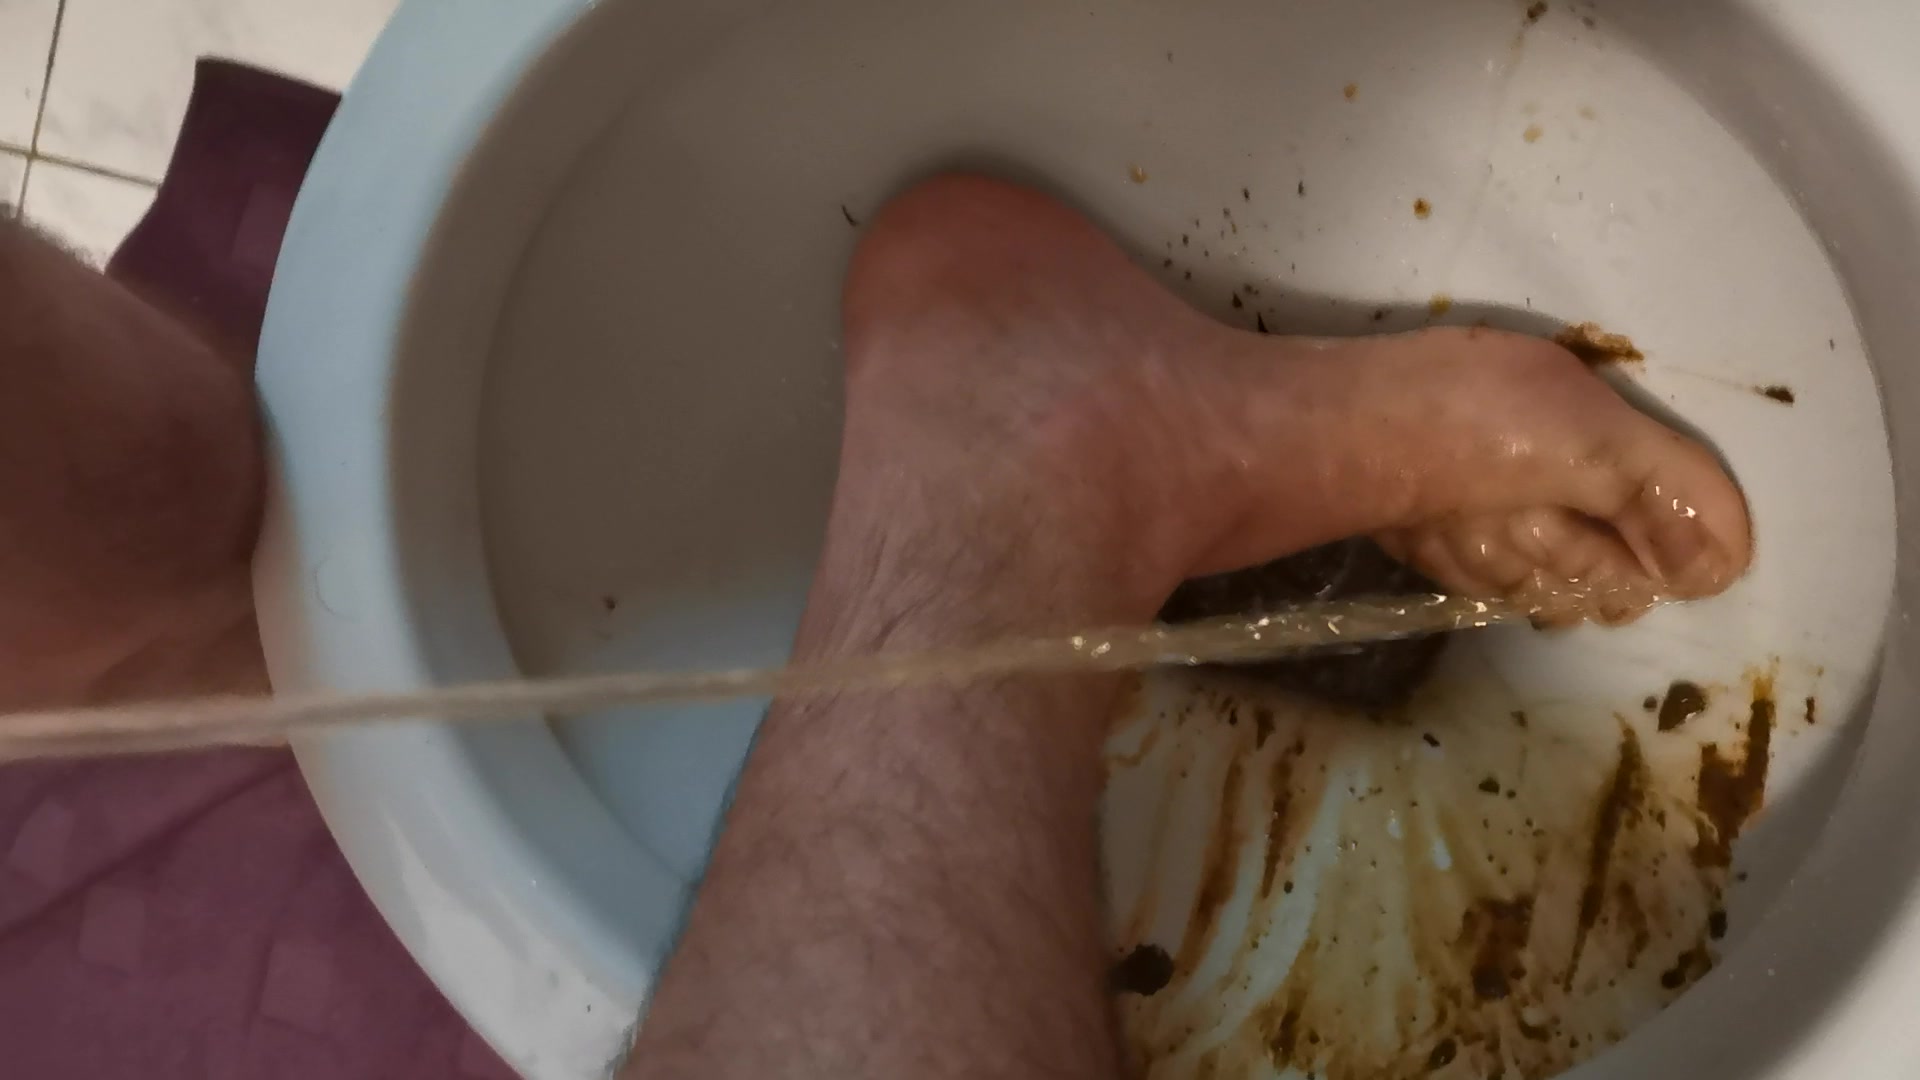 foot in the closet with shit and piss